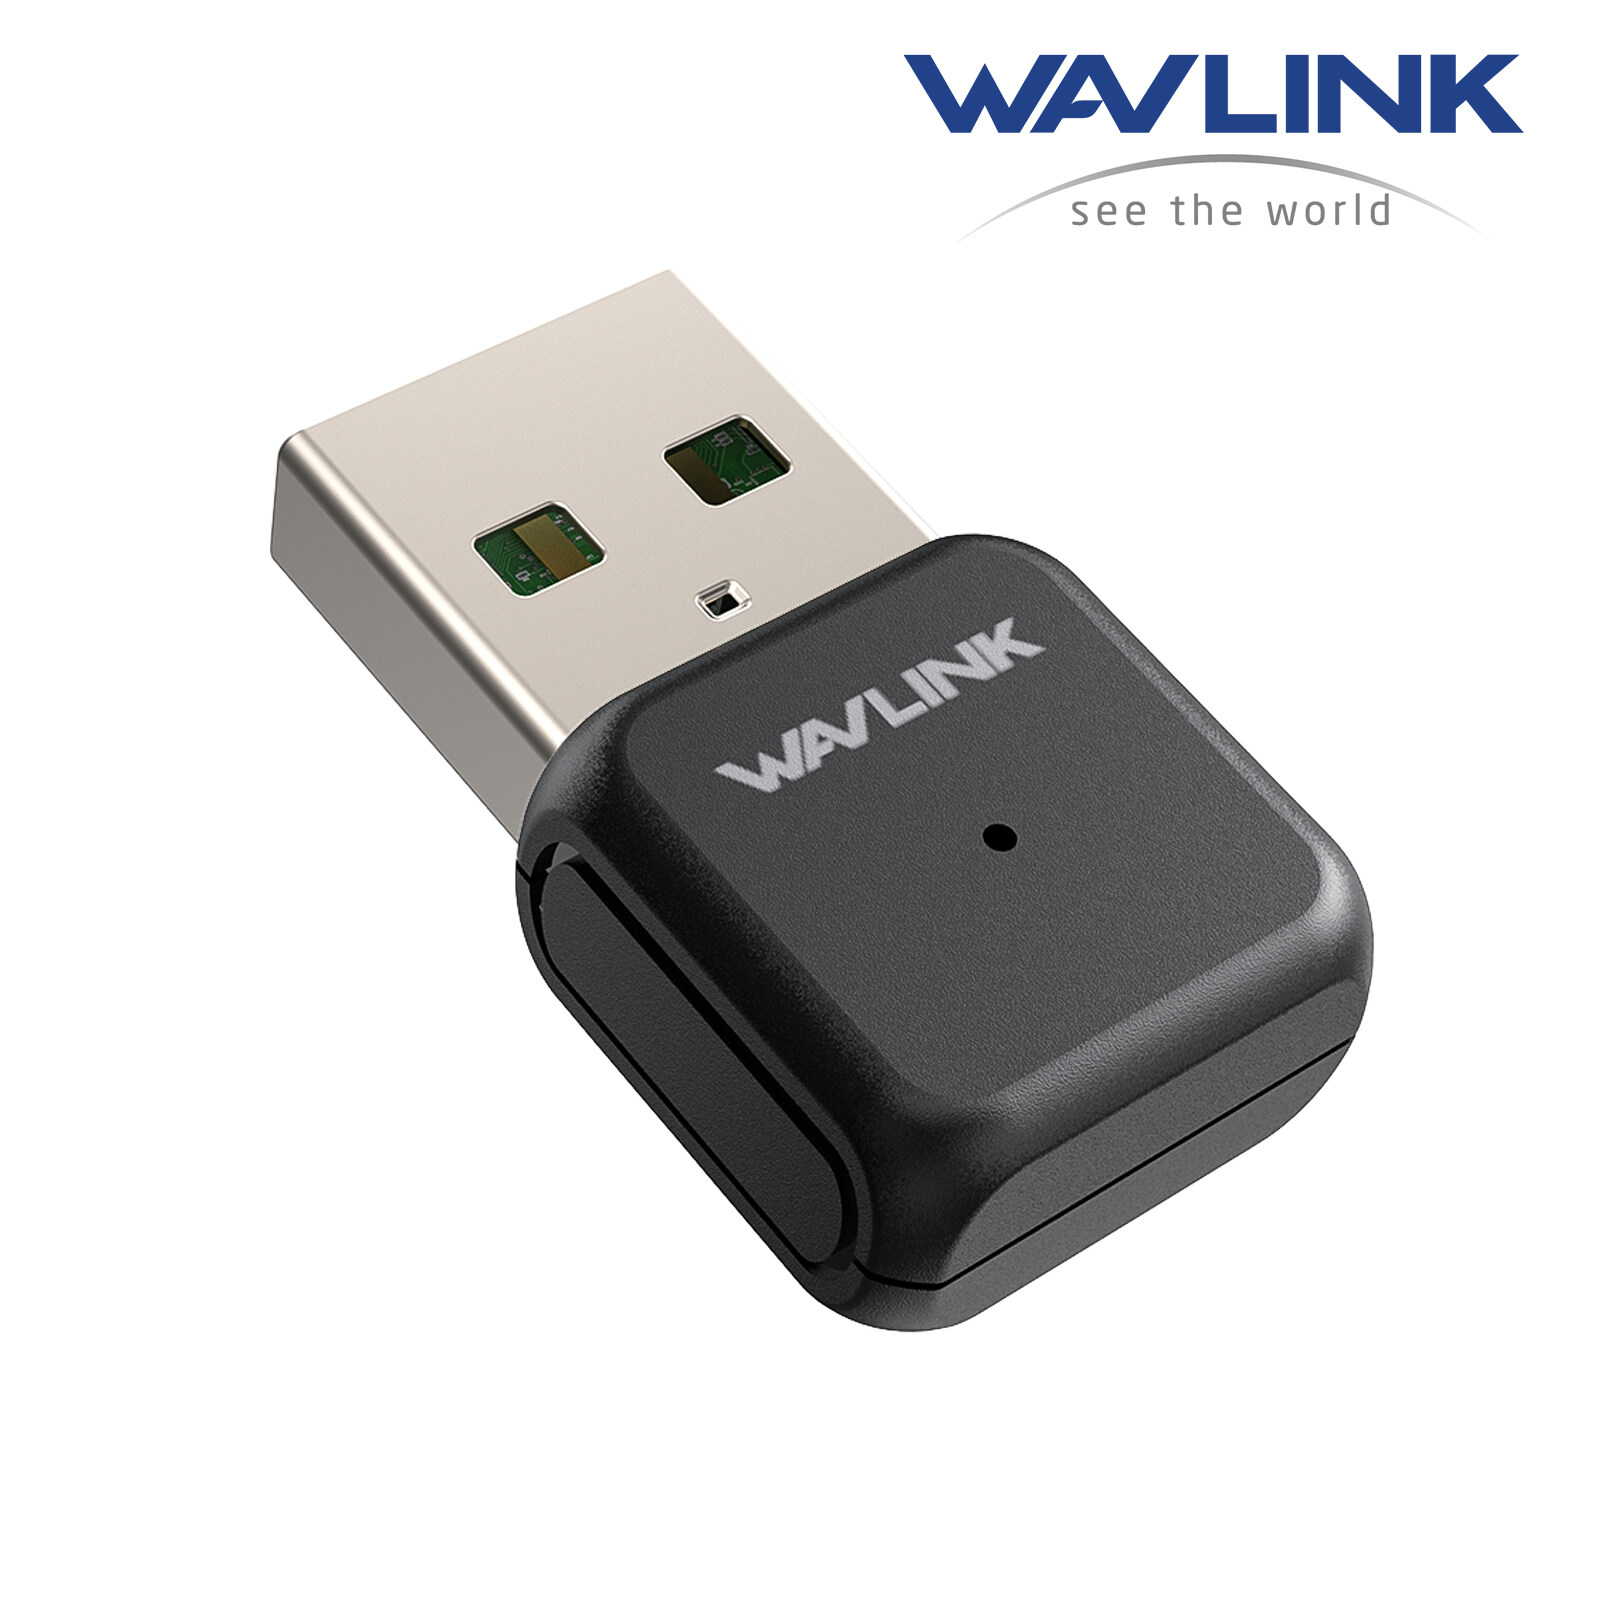 Nano USB WiFi Adapter for PC -Inamax AC600 2.4G/5G Dual Band Wireless  Network Adapter for Desktop PC Laptop, Mini Travel Size, Supports Windows  11,10